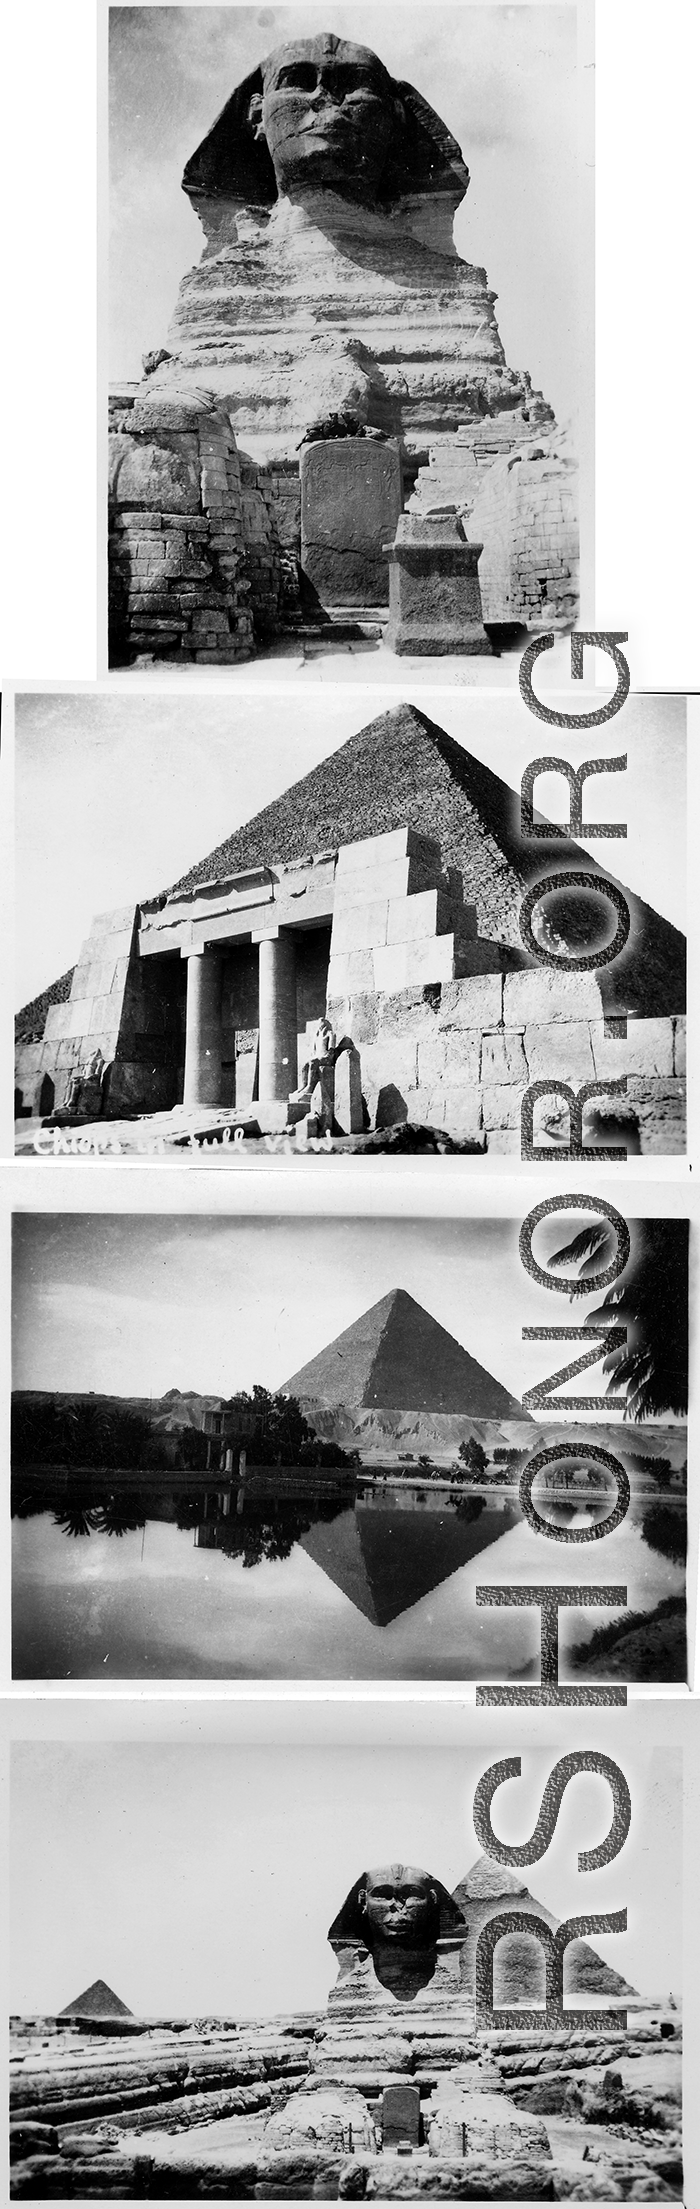 Area around the Great Pyramid, likely taken during Mazer's journey to the CBI. During WWII.  It is quite possible that Mazer deployed overseas as a replacement aboard ATC transport aircraft, not knowing to what unit/plane he would be assigned until his arrival in India or China. If so, this eclectic group might even be a sampling of the people on a recent group flight.  (Thanks to Tony Strotman for additional information.)